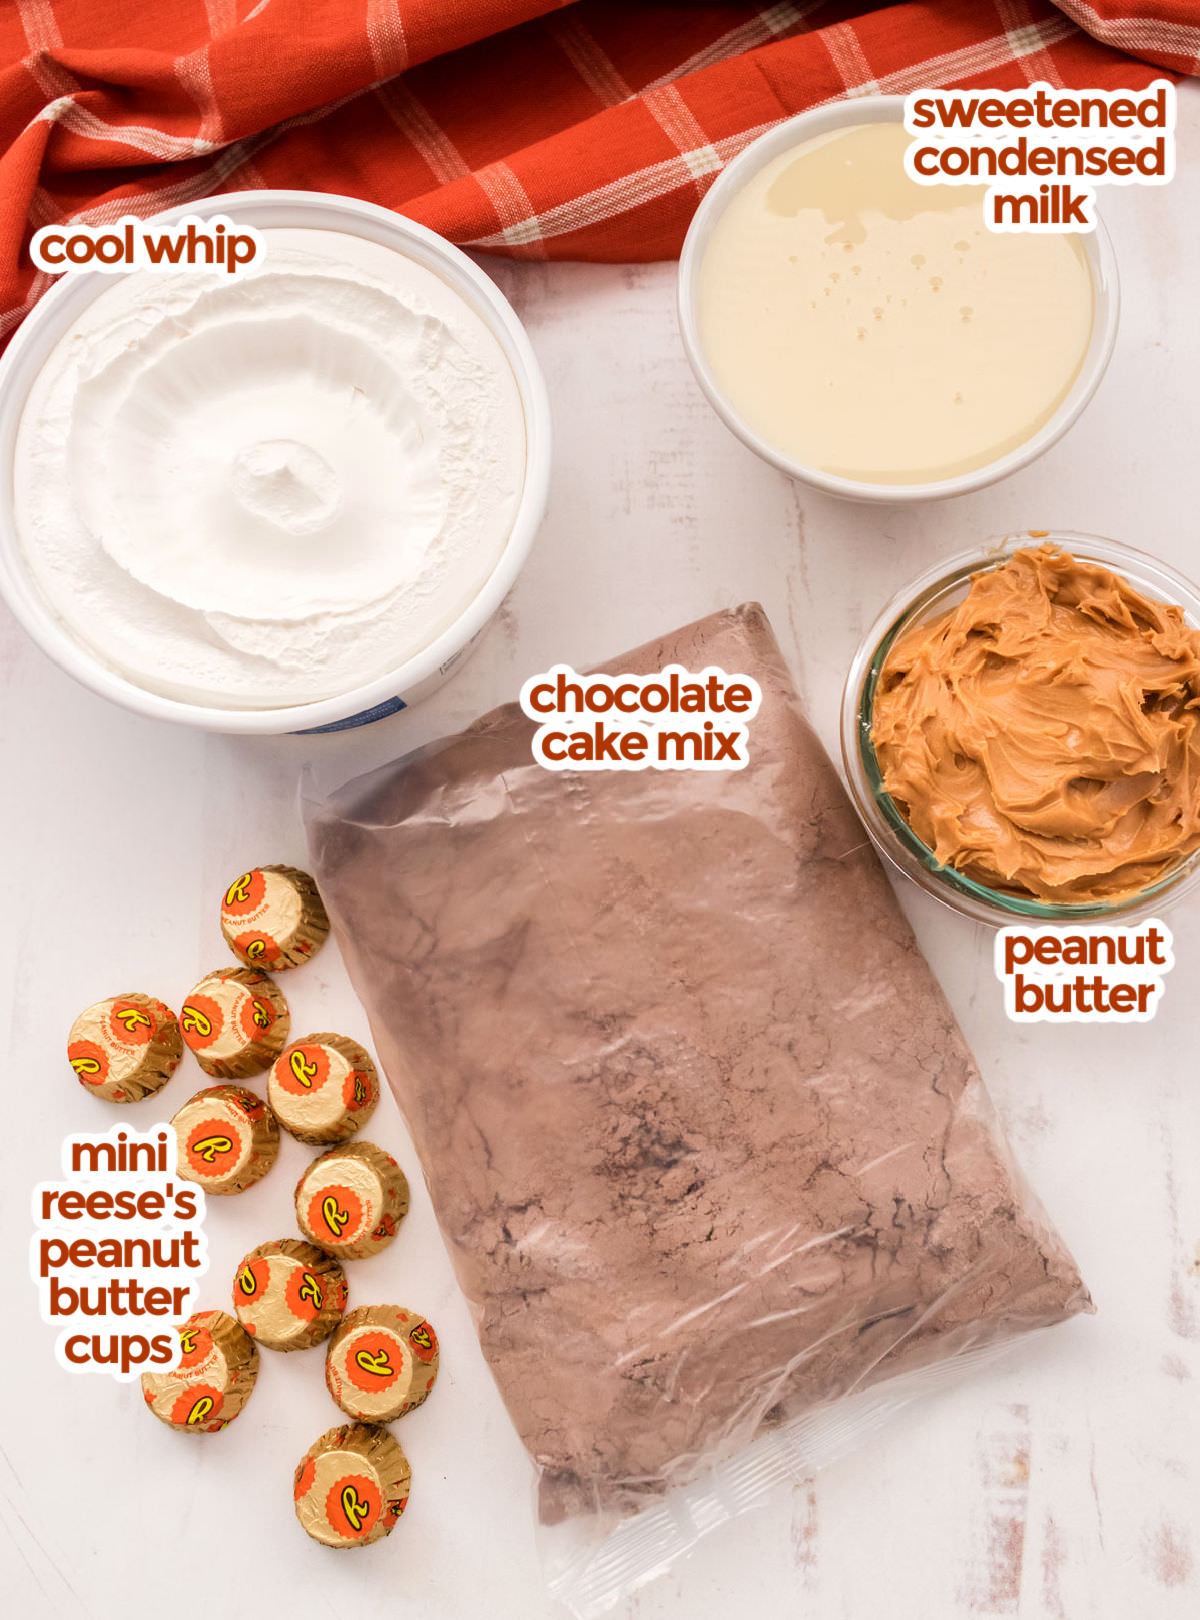 All the ingredients you will need to make Chocolate Peanut Butter Poke Cake including chocolate cake mix, peanut butter, sweetened condensed milk, cool whip and mini Reese's Peanut Butter Cups.